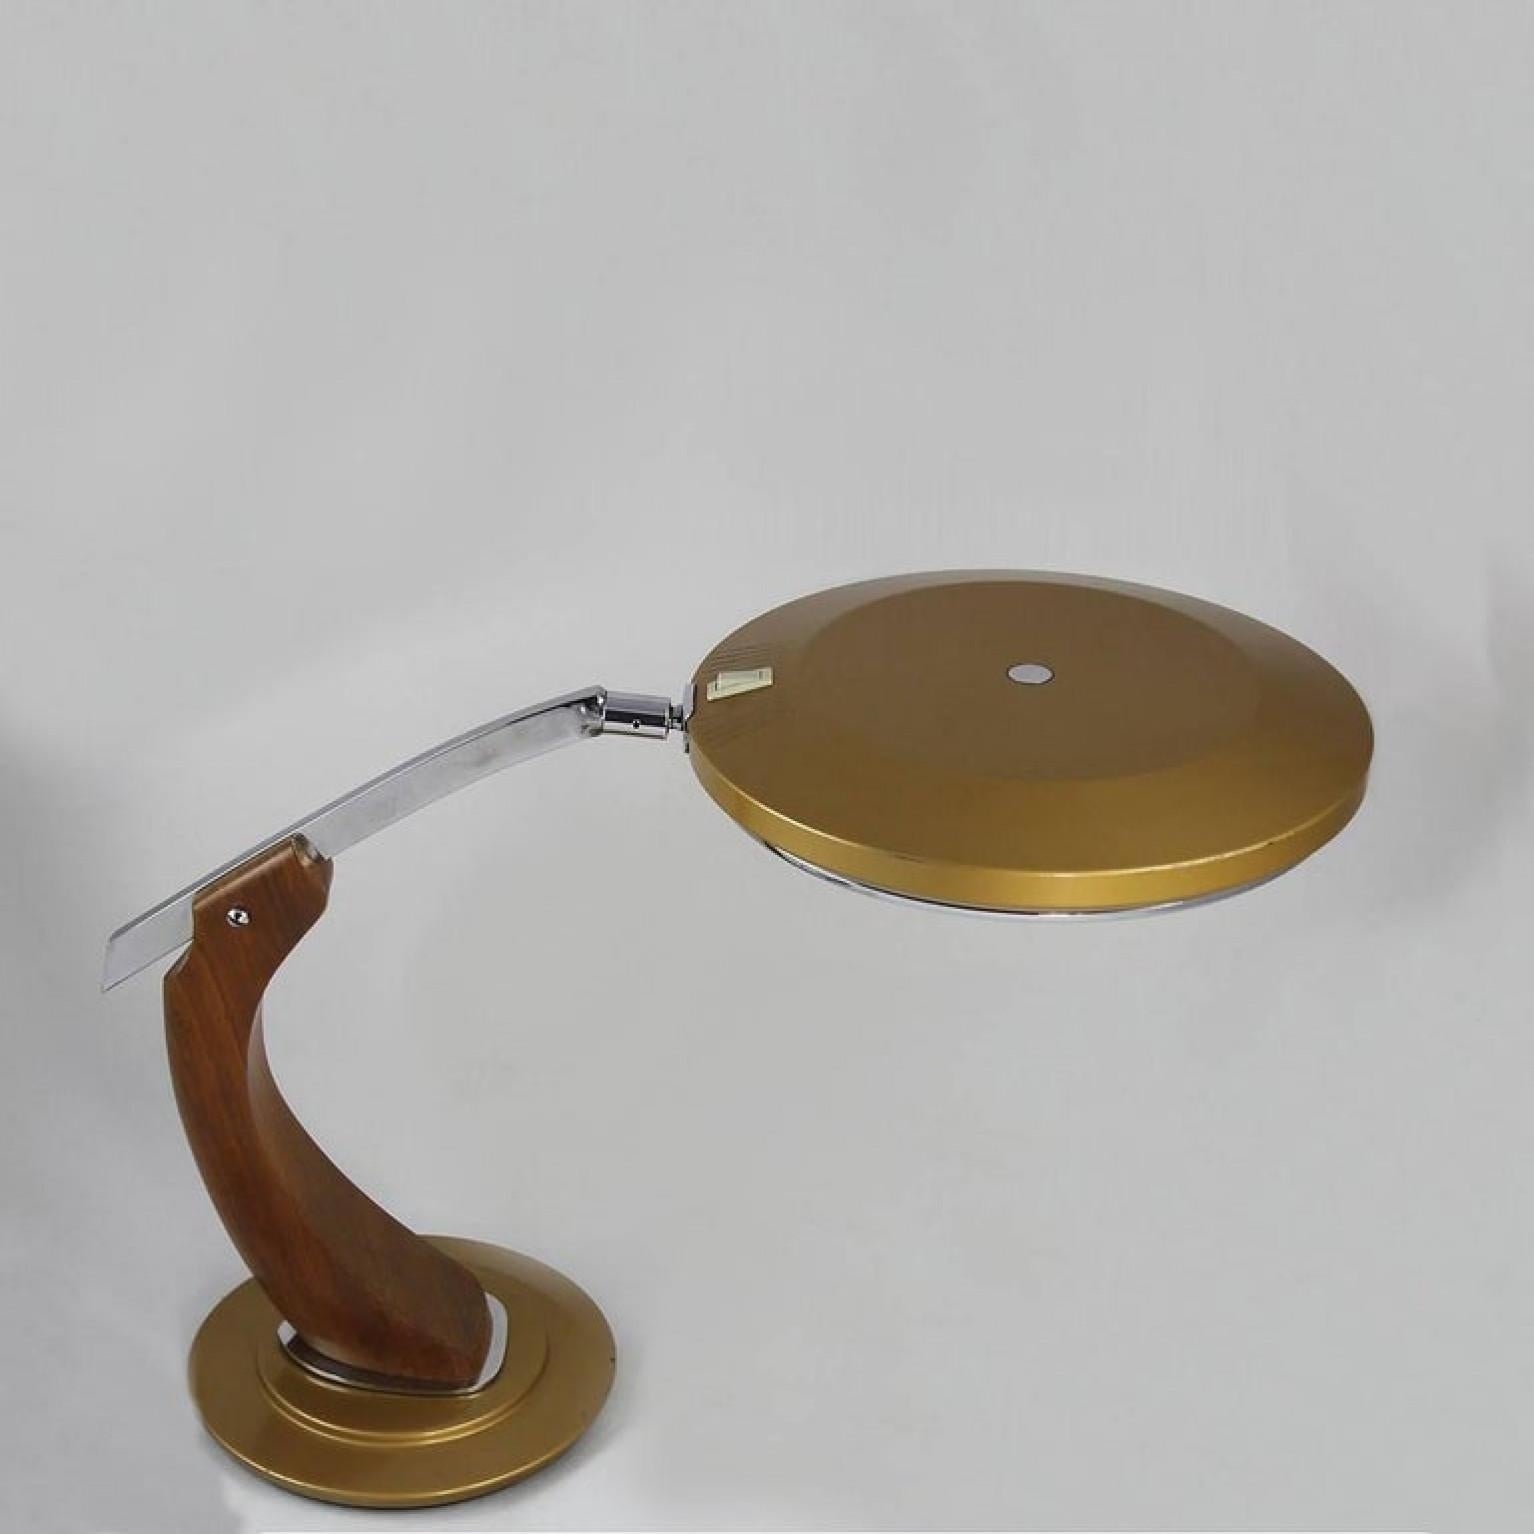 20th Century Fase Madrid Midcentury Oak and Gold Desk Lamp, 1960s (Copy) For Sale